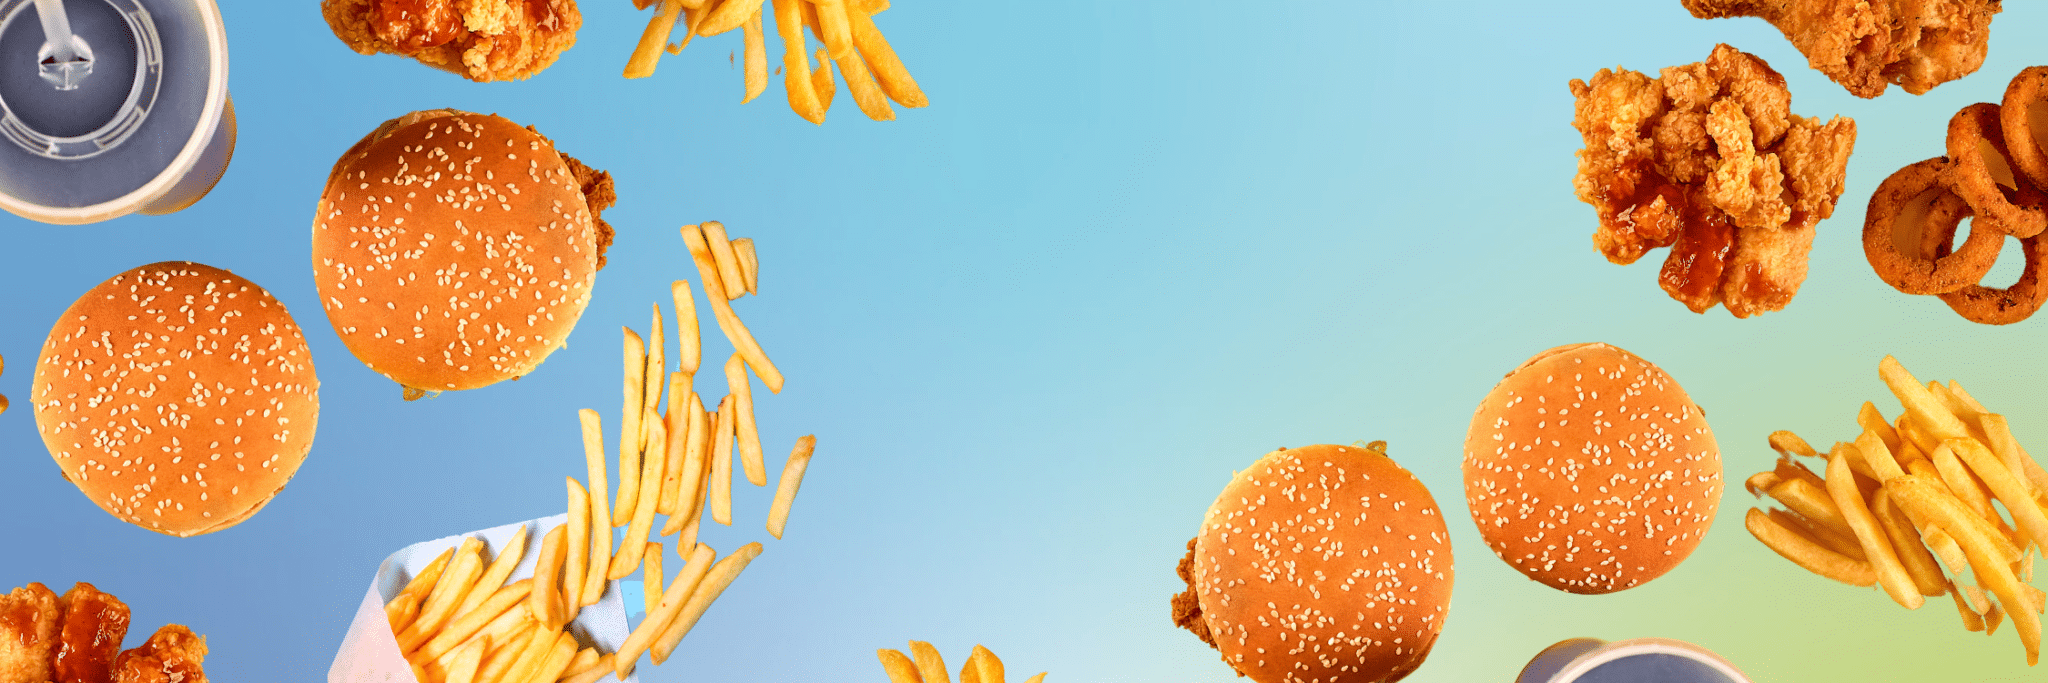 Fast food burgers and fries on a blue background